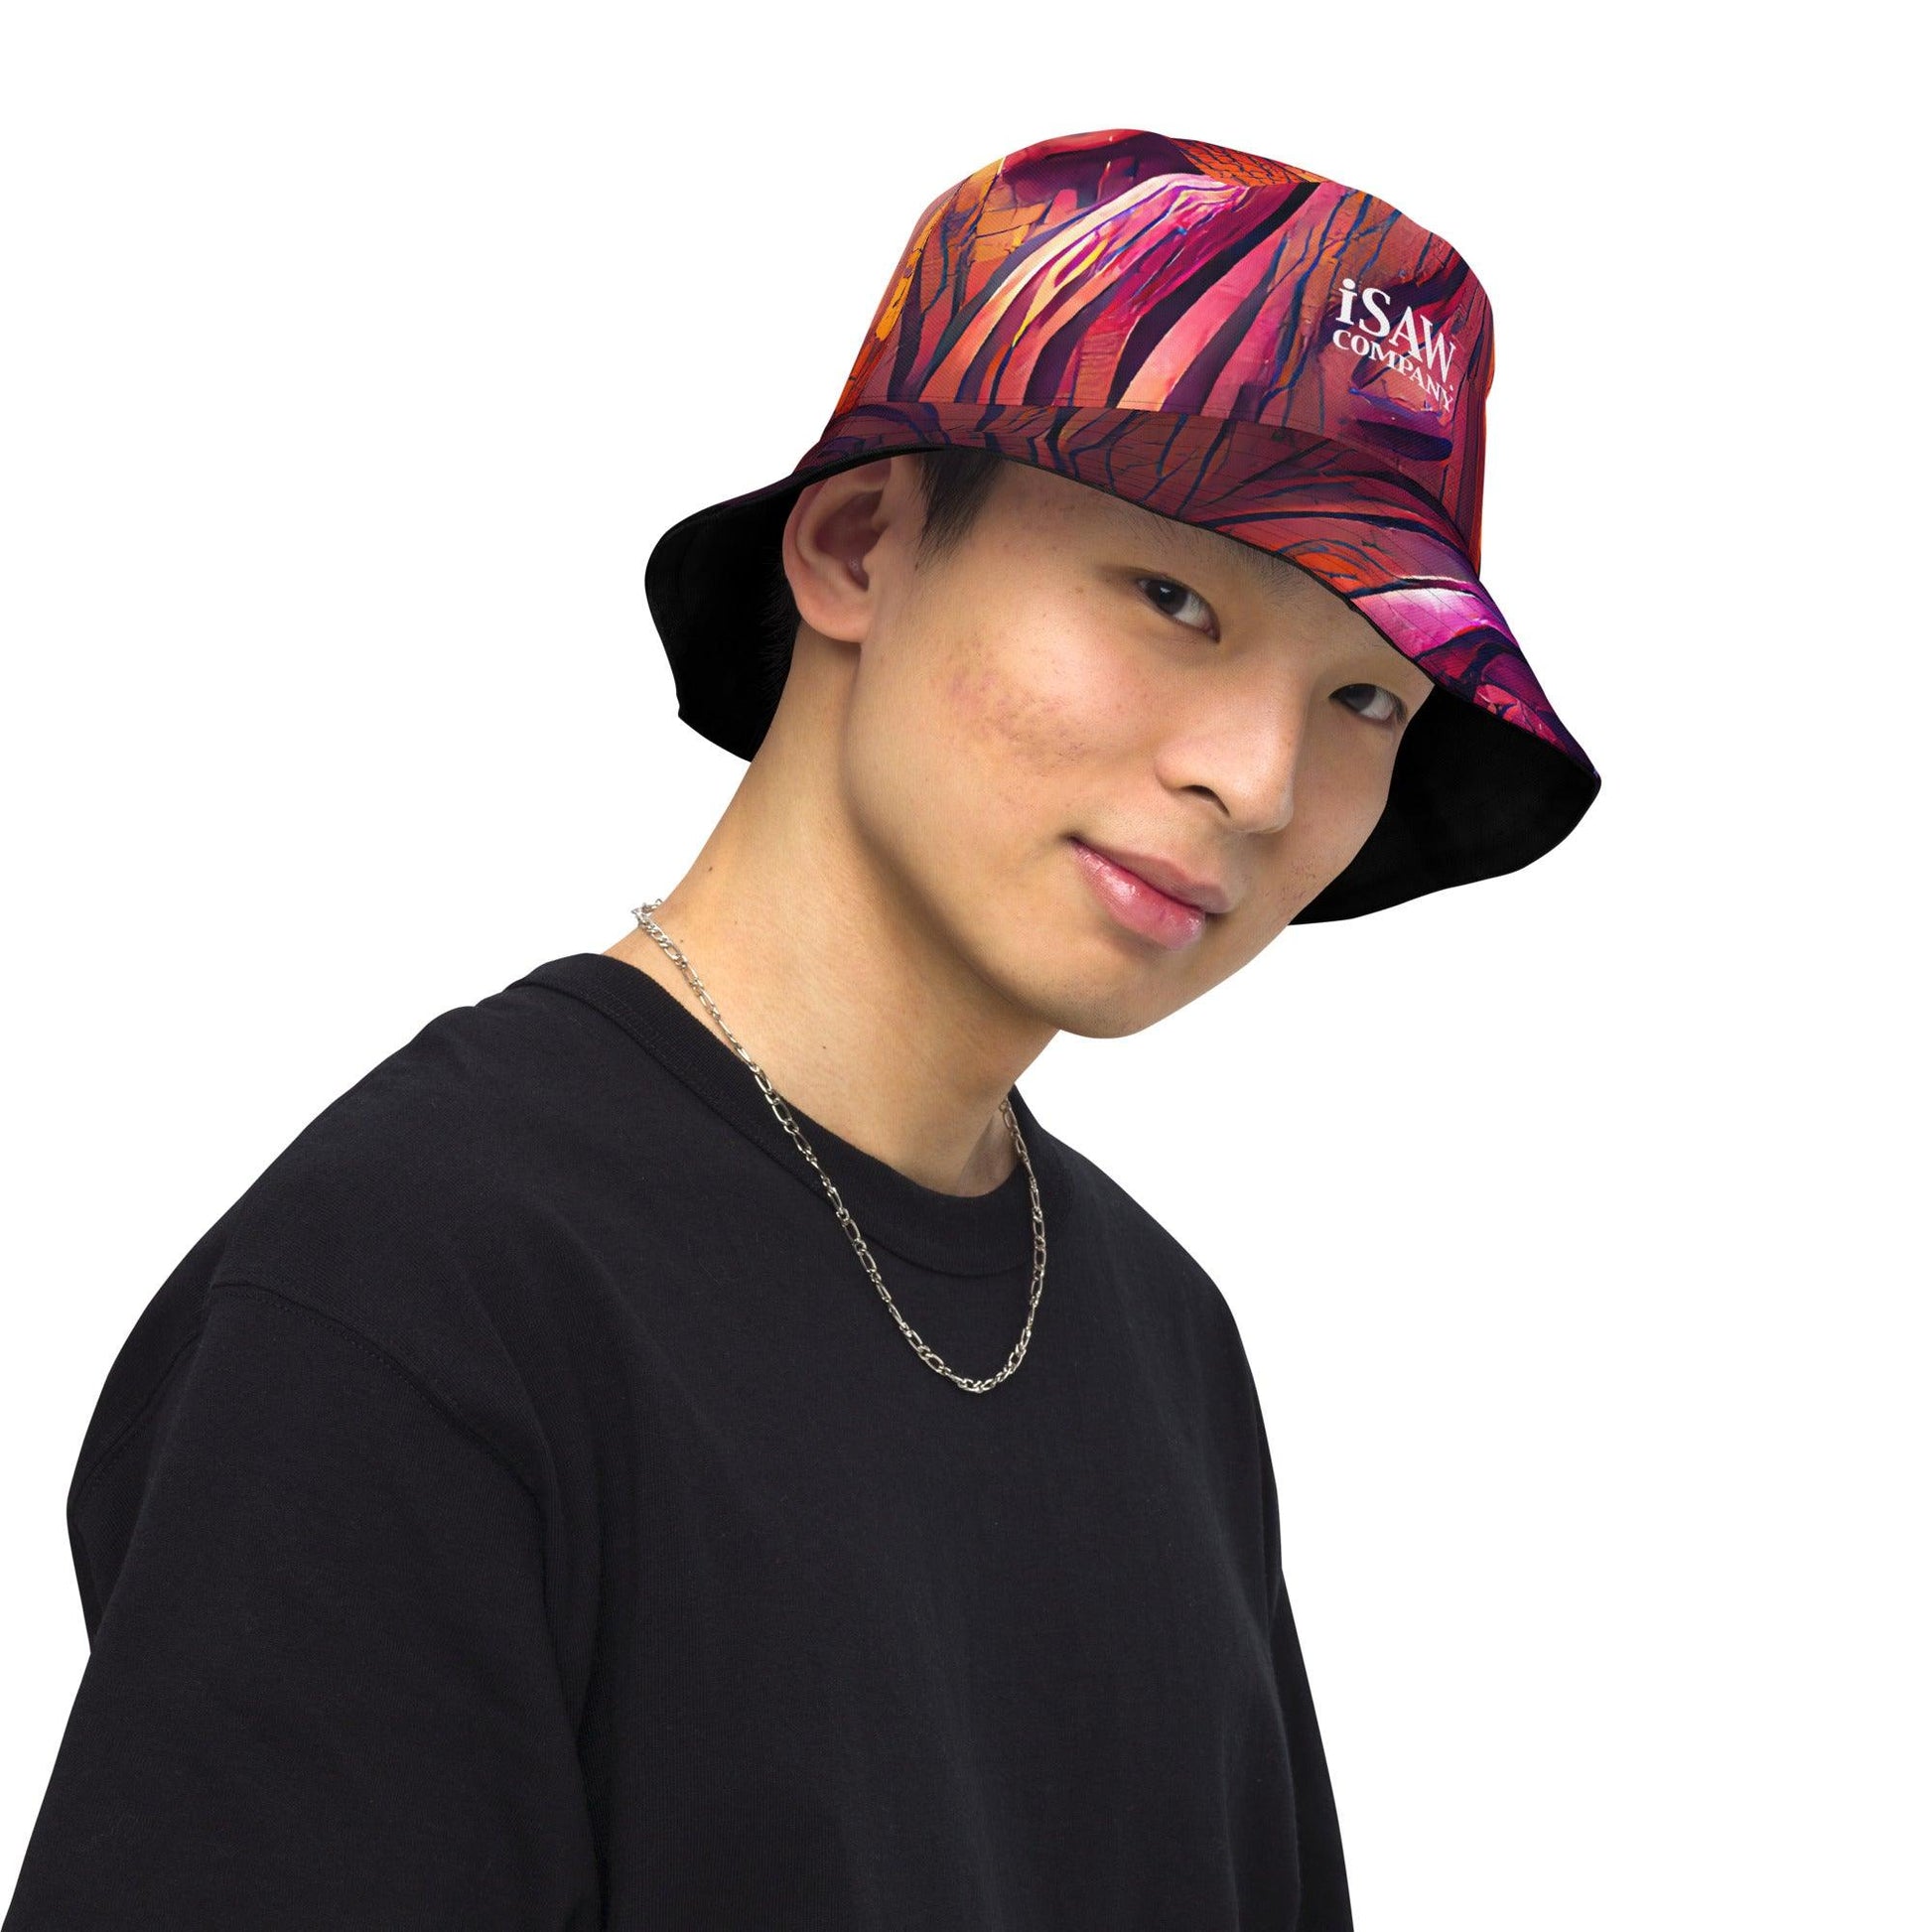 iSAW Reversible Black Bucket Hat - iSAW Company